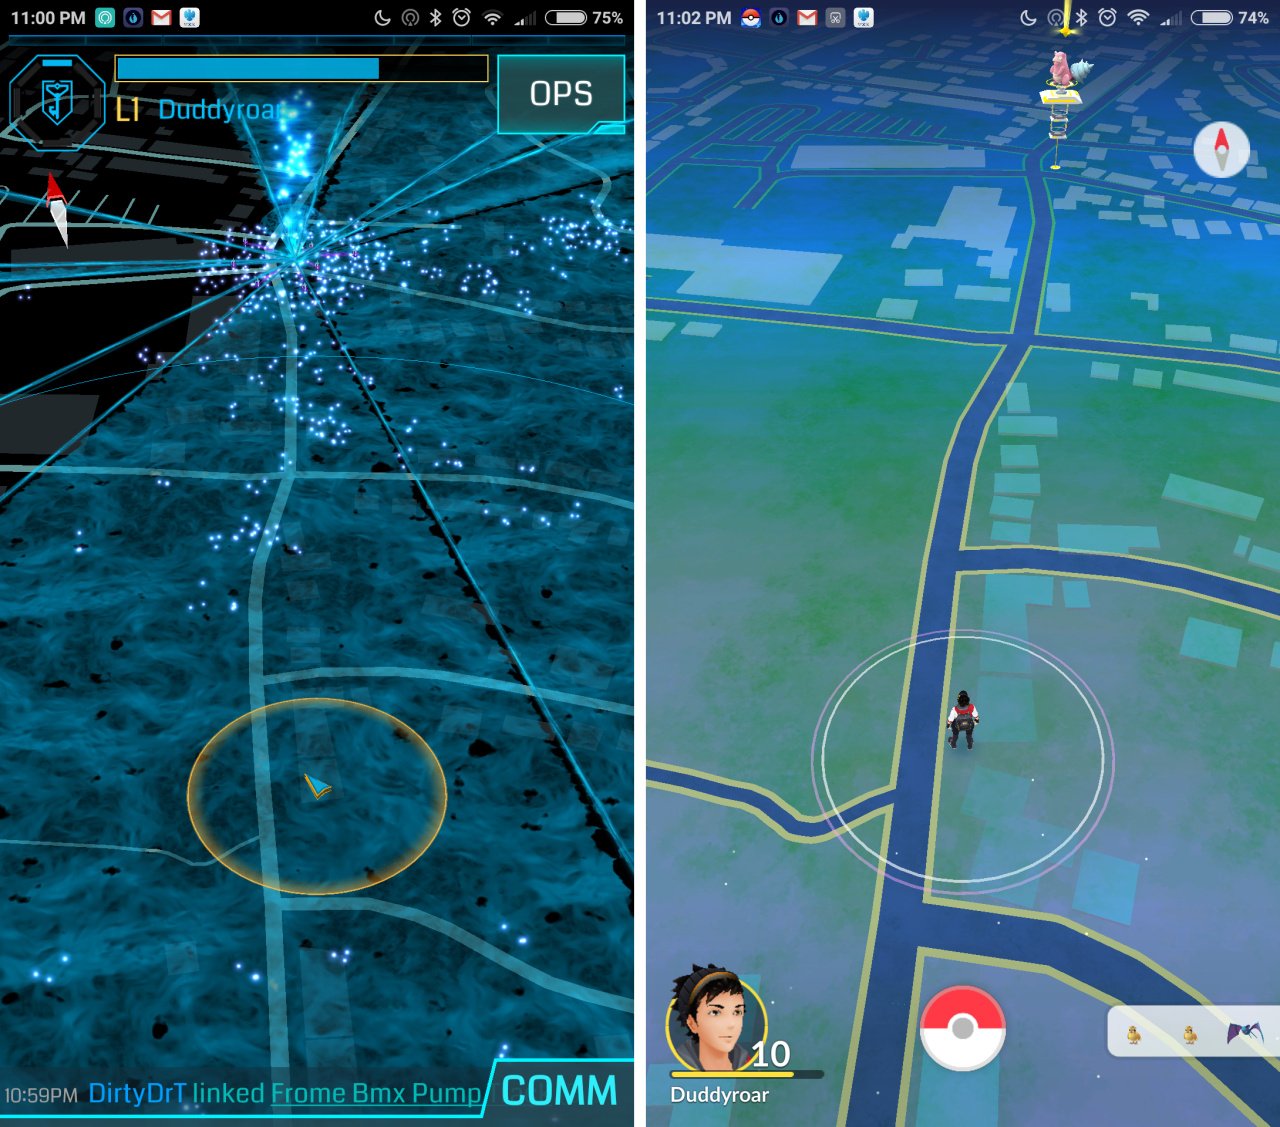 Your ingress username is being reserved for Pokemon Go